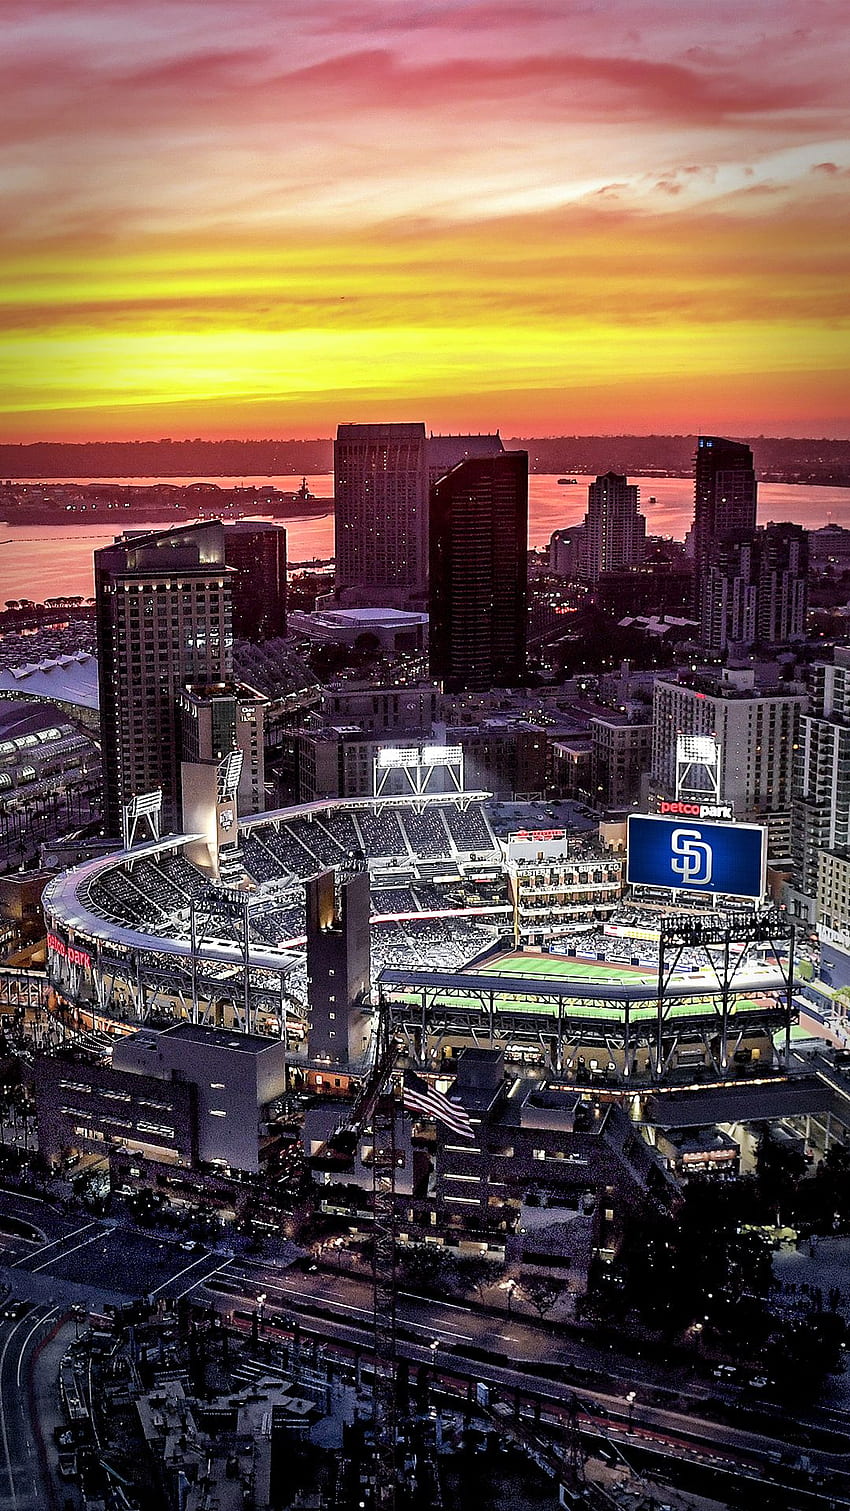 city connect cool san diego padres wallpaper